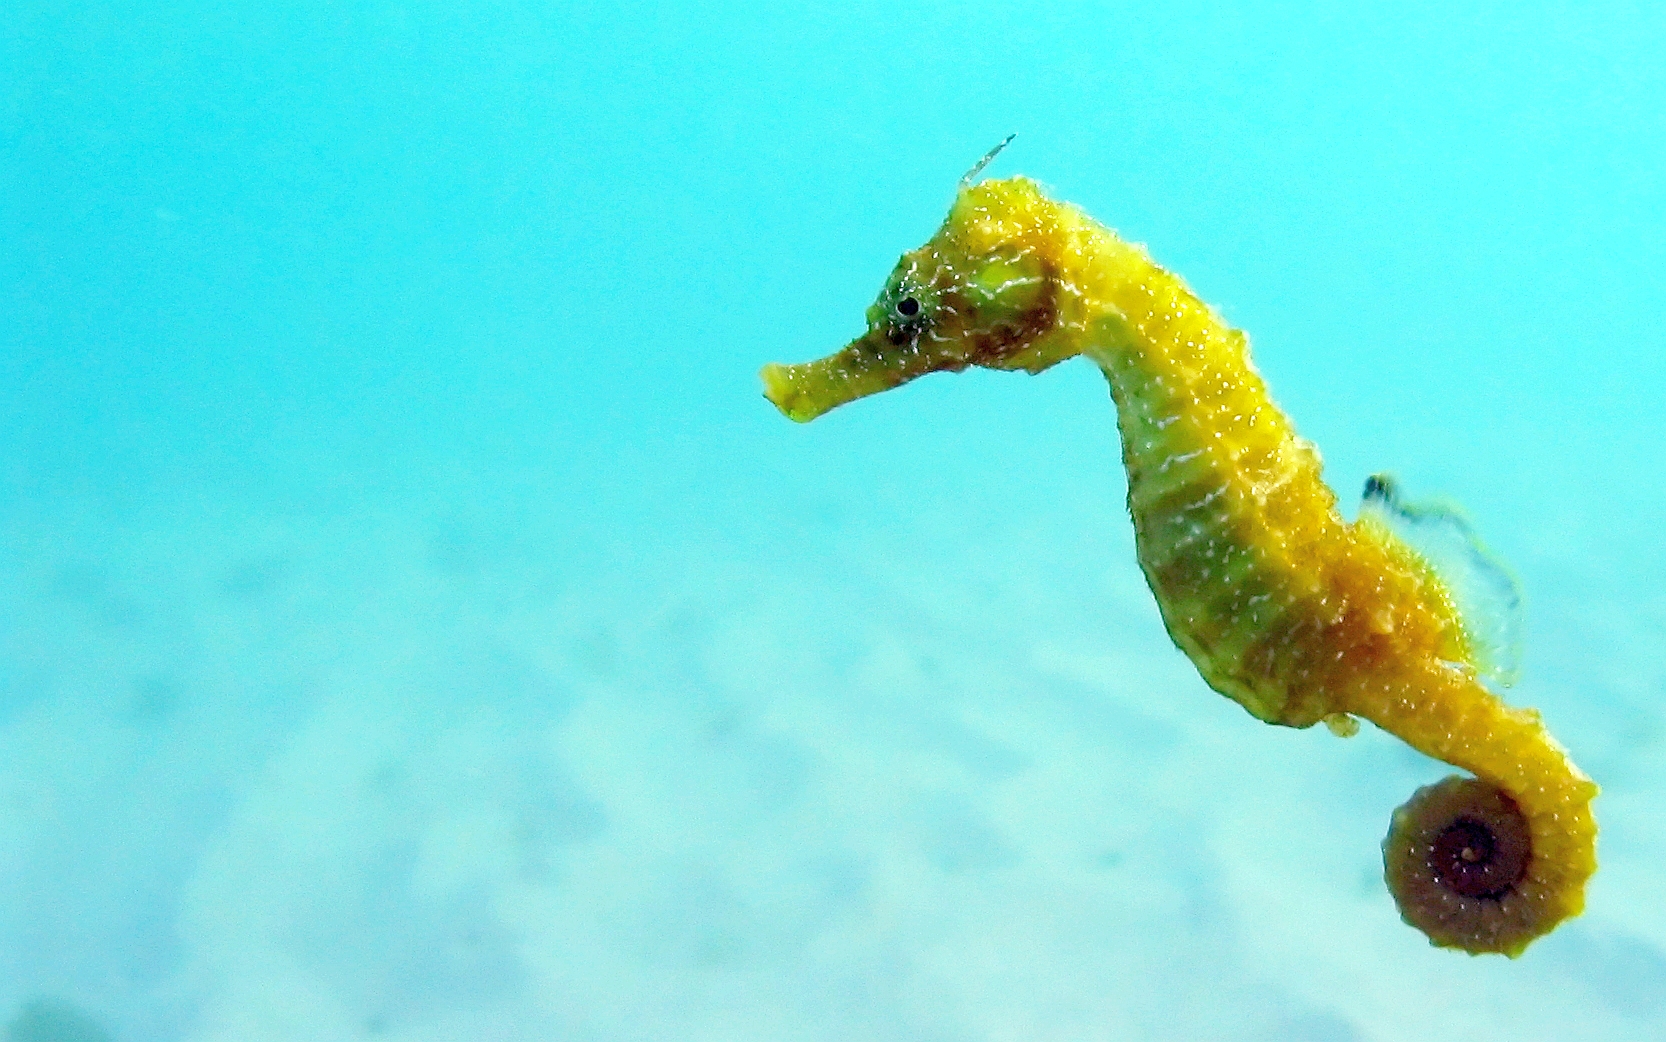 Images of Seahorse | 1666x1042